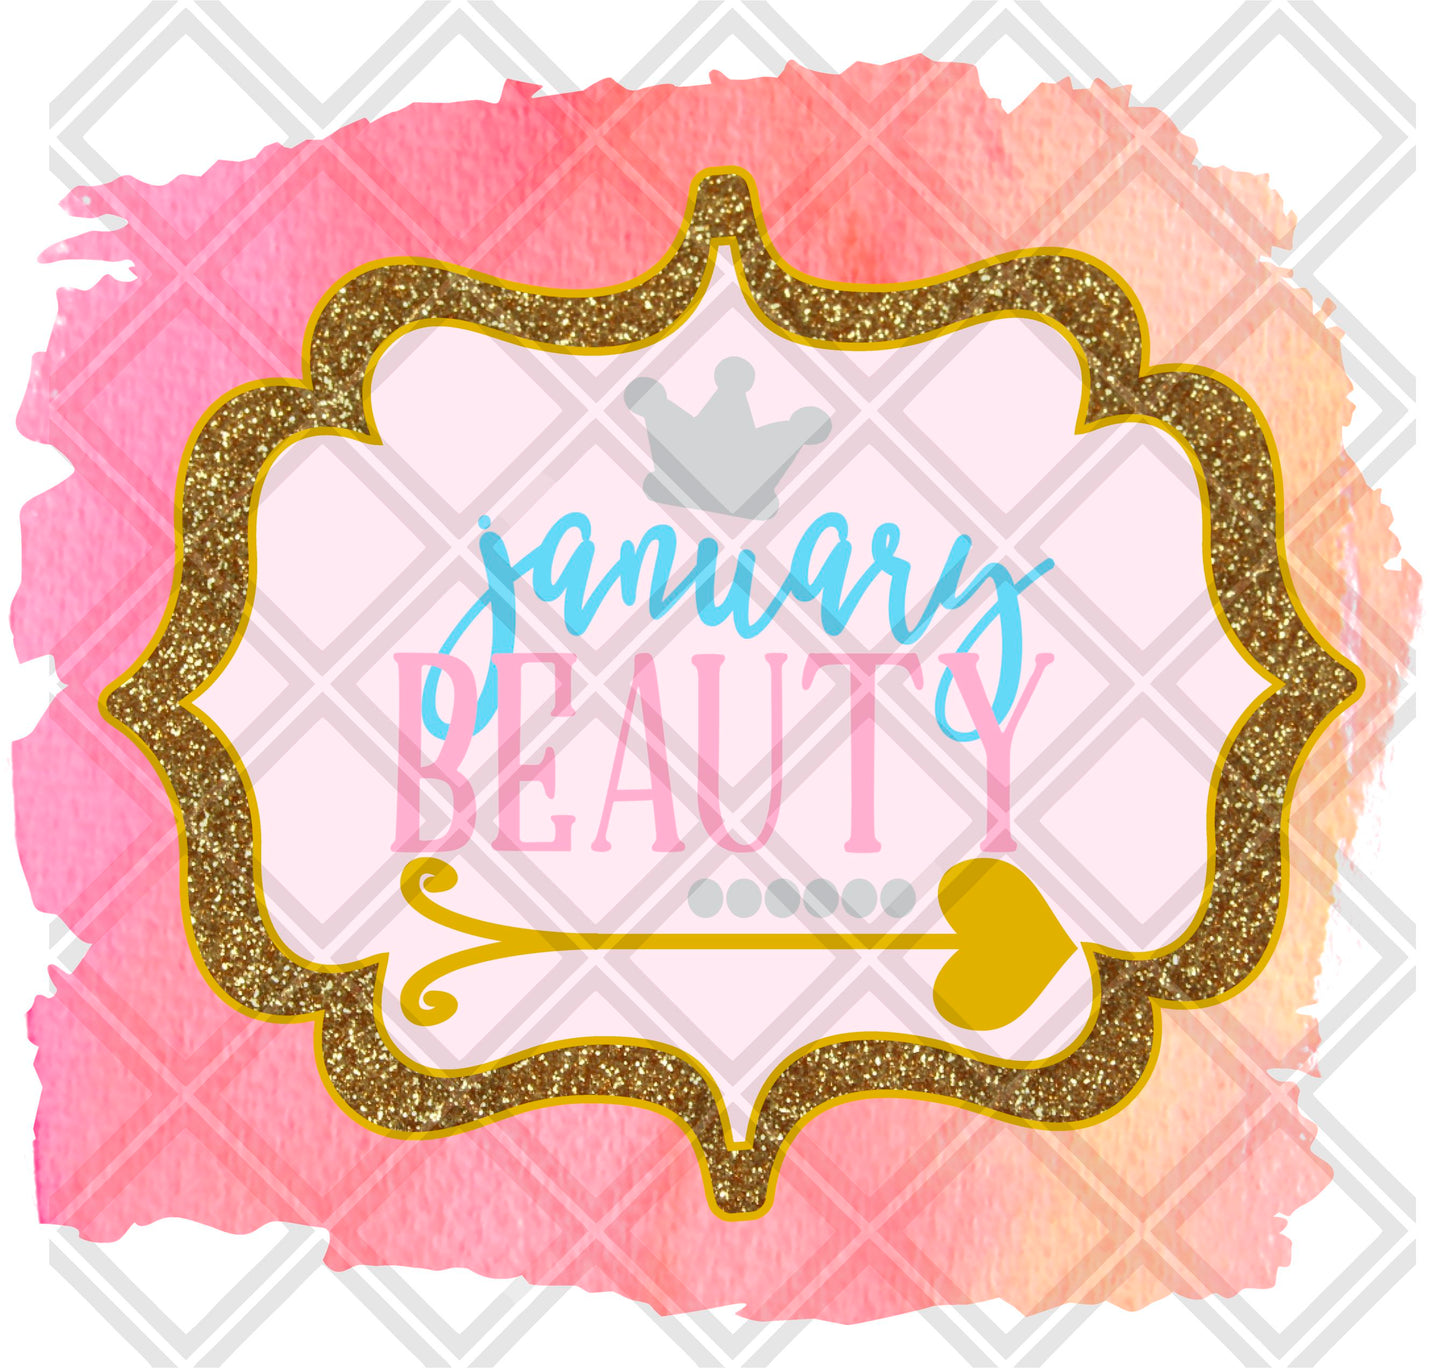 JANUARY BEAUTY MONTH png Digital Download Instand Download